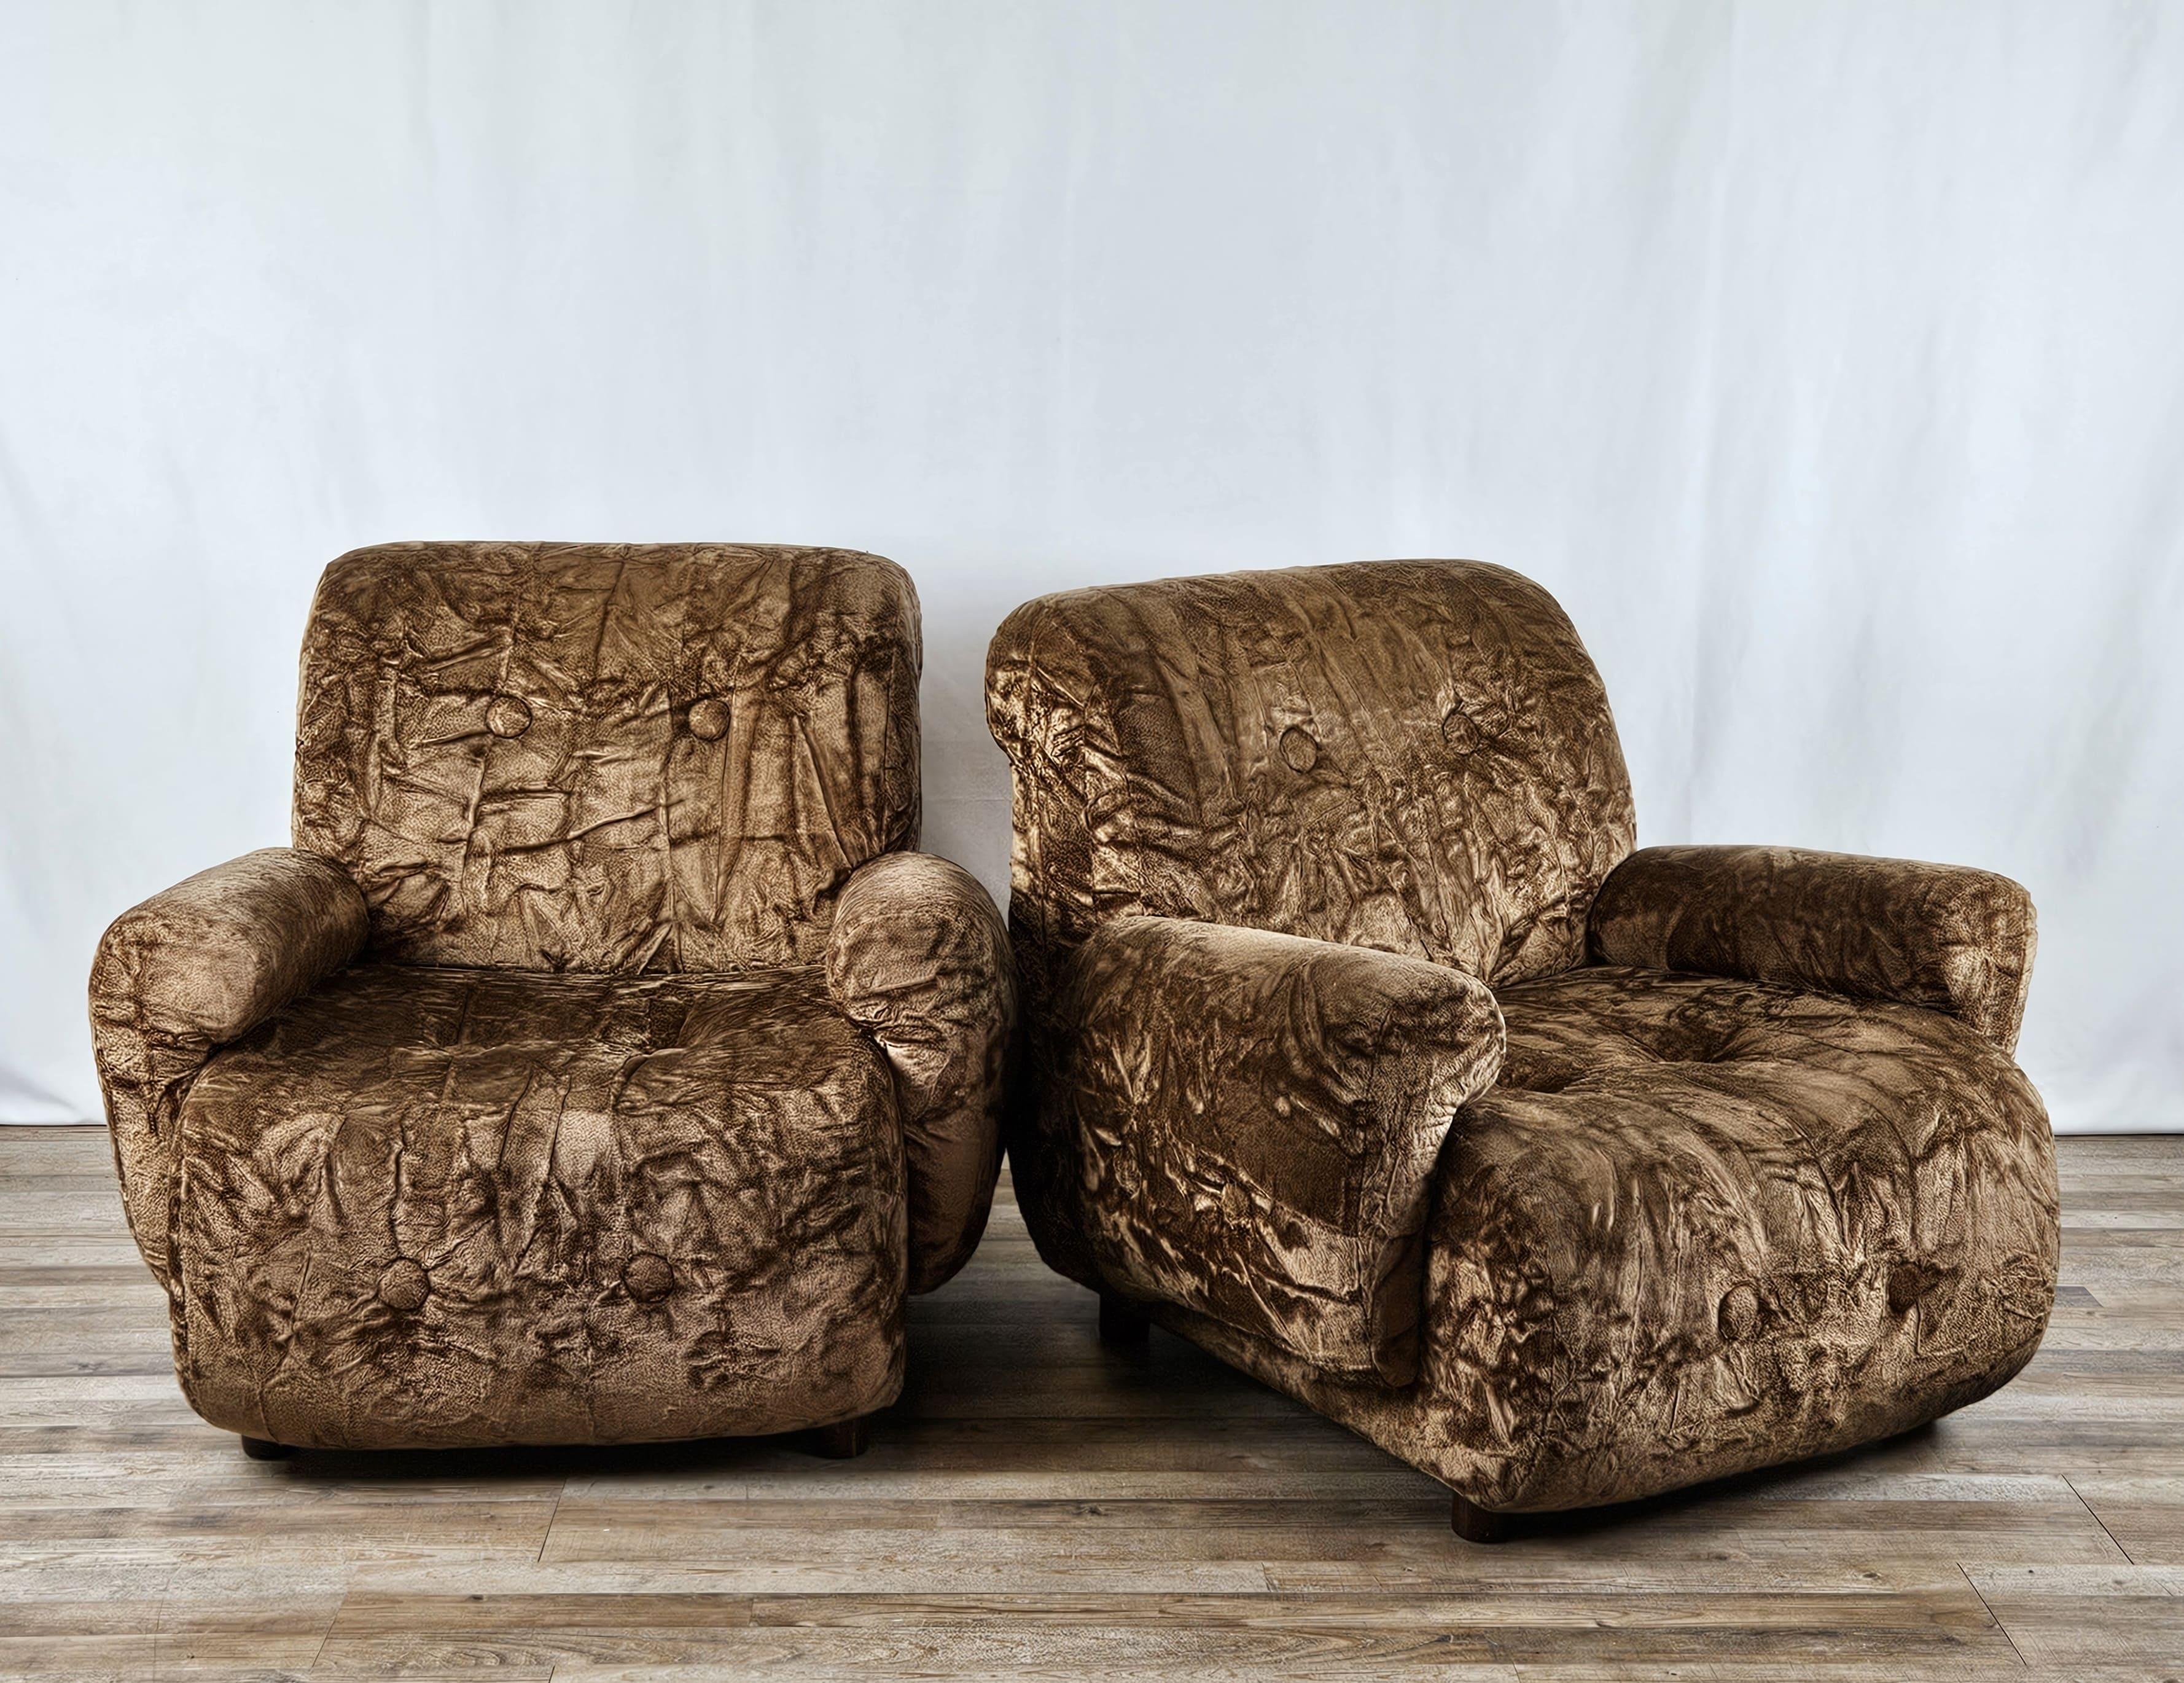 Pair of 1970s armchairs upholstered in original vintage brown chenille, very comfortable and versatile thanks to the modern line they are ideal for all kinds of environments.

Normal signs of wear due to age and use.